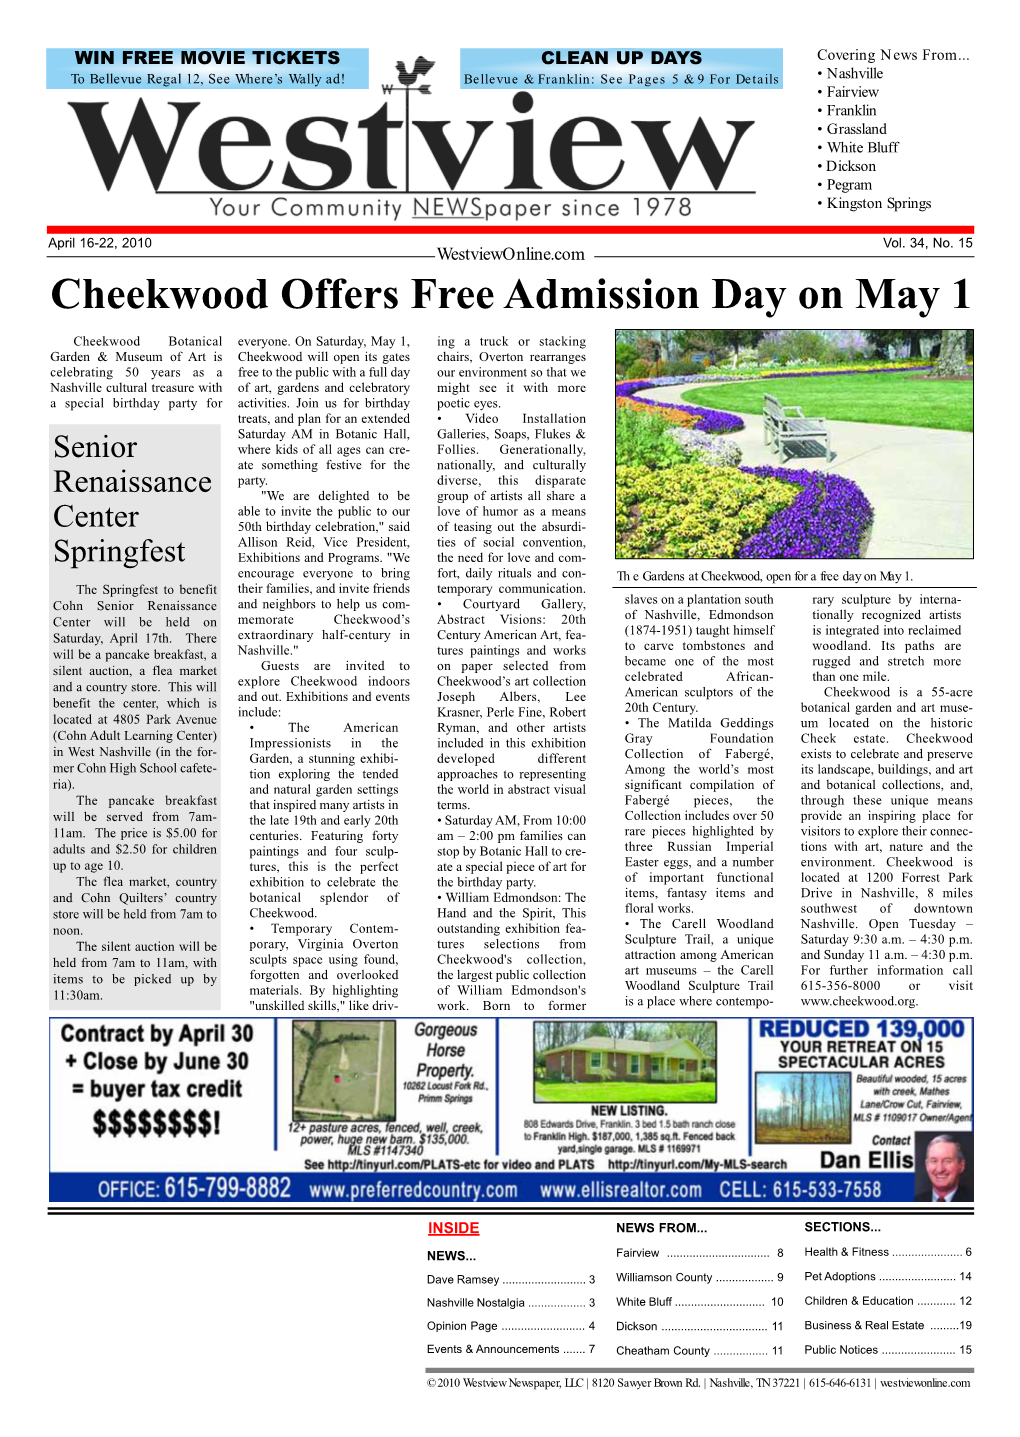 Cheekwood Offers Free Admission Day on May 1